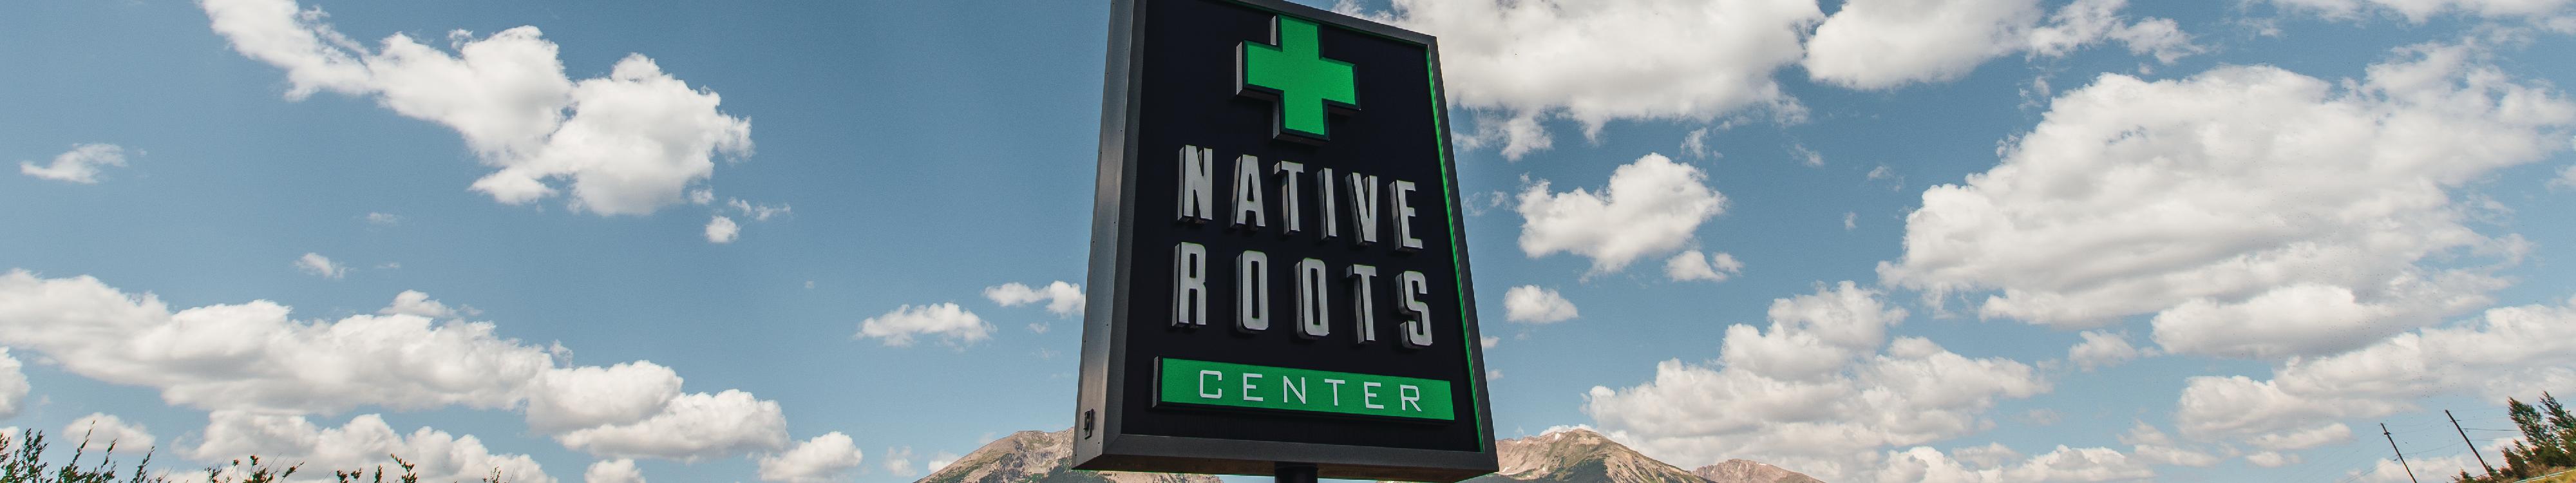 Native Roots Dillonstore image